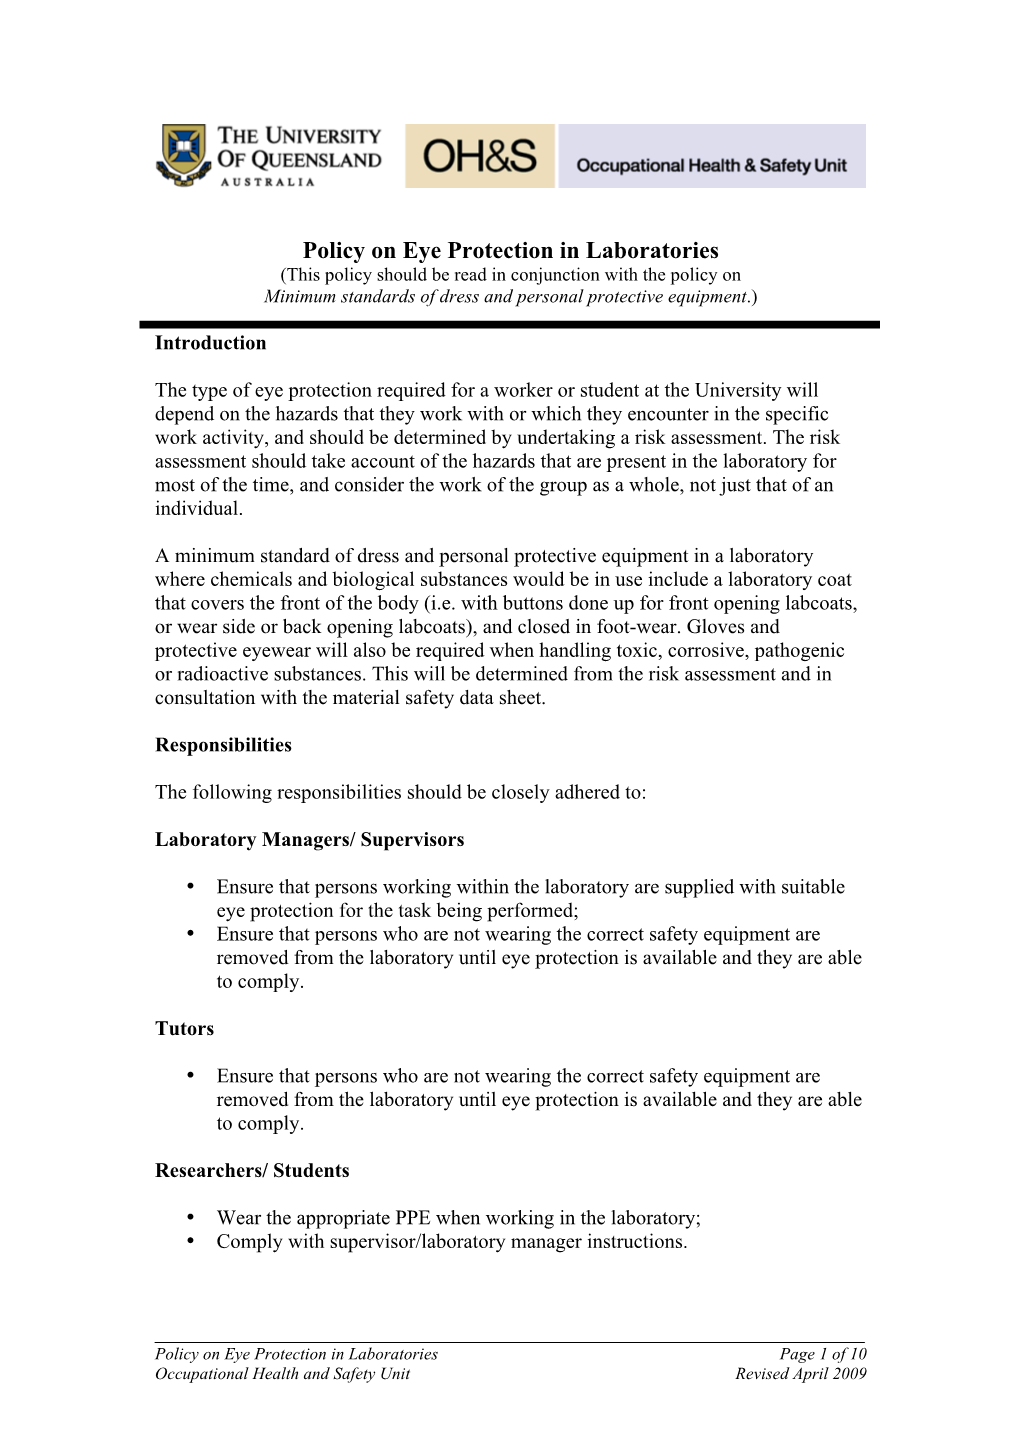 Policy on Eye Protection in Laboratories (This Policy Should Be Read in Conjunction with the Policy on Minimum Standards of Dress and Personal Protective Equipment.)